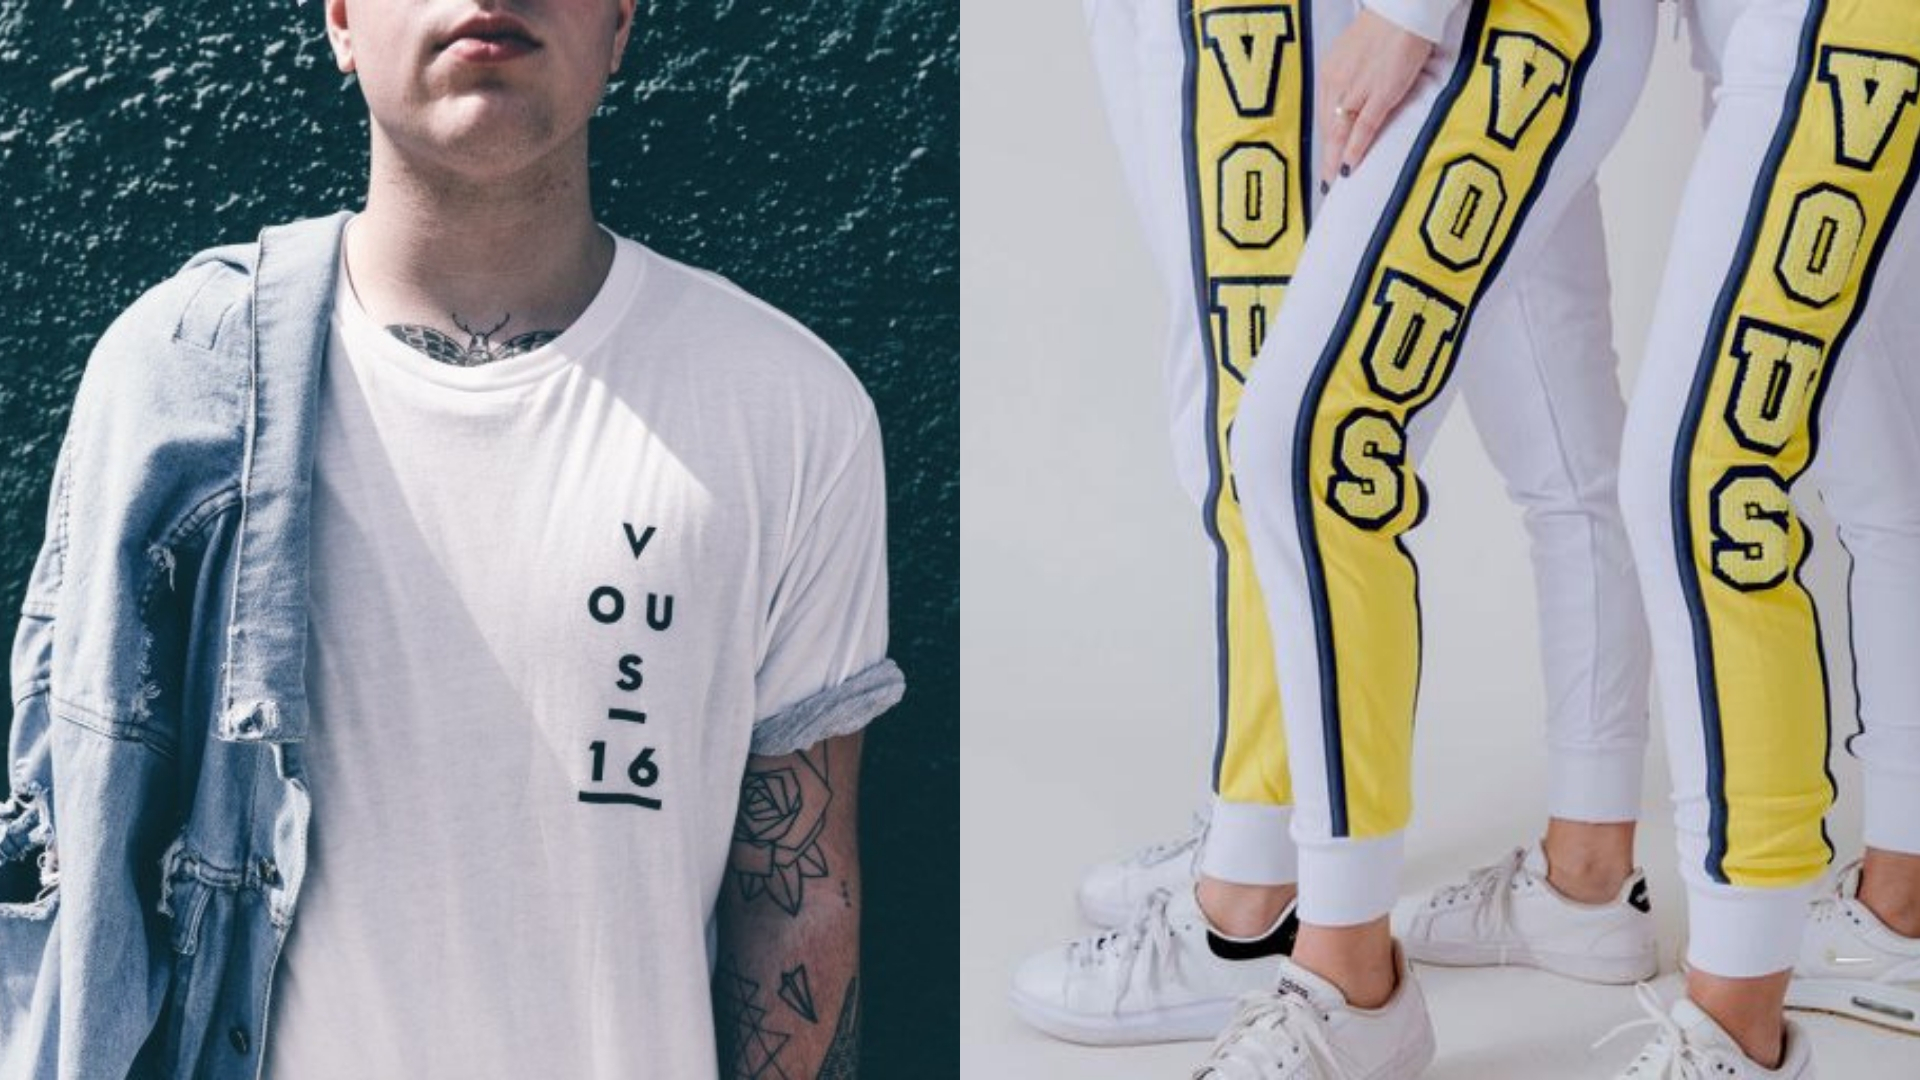 At left, a man wearing a Fear of God x Vous t-shirt. At right, Vous sweatpants on several women's legs